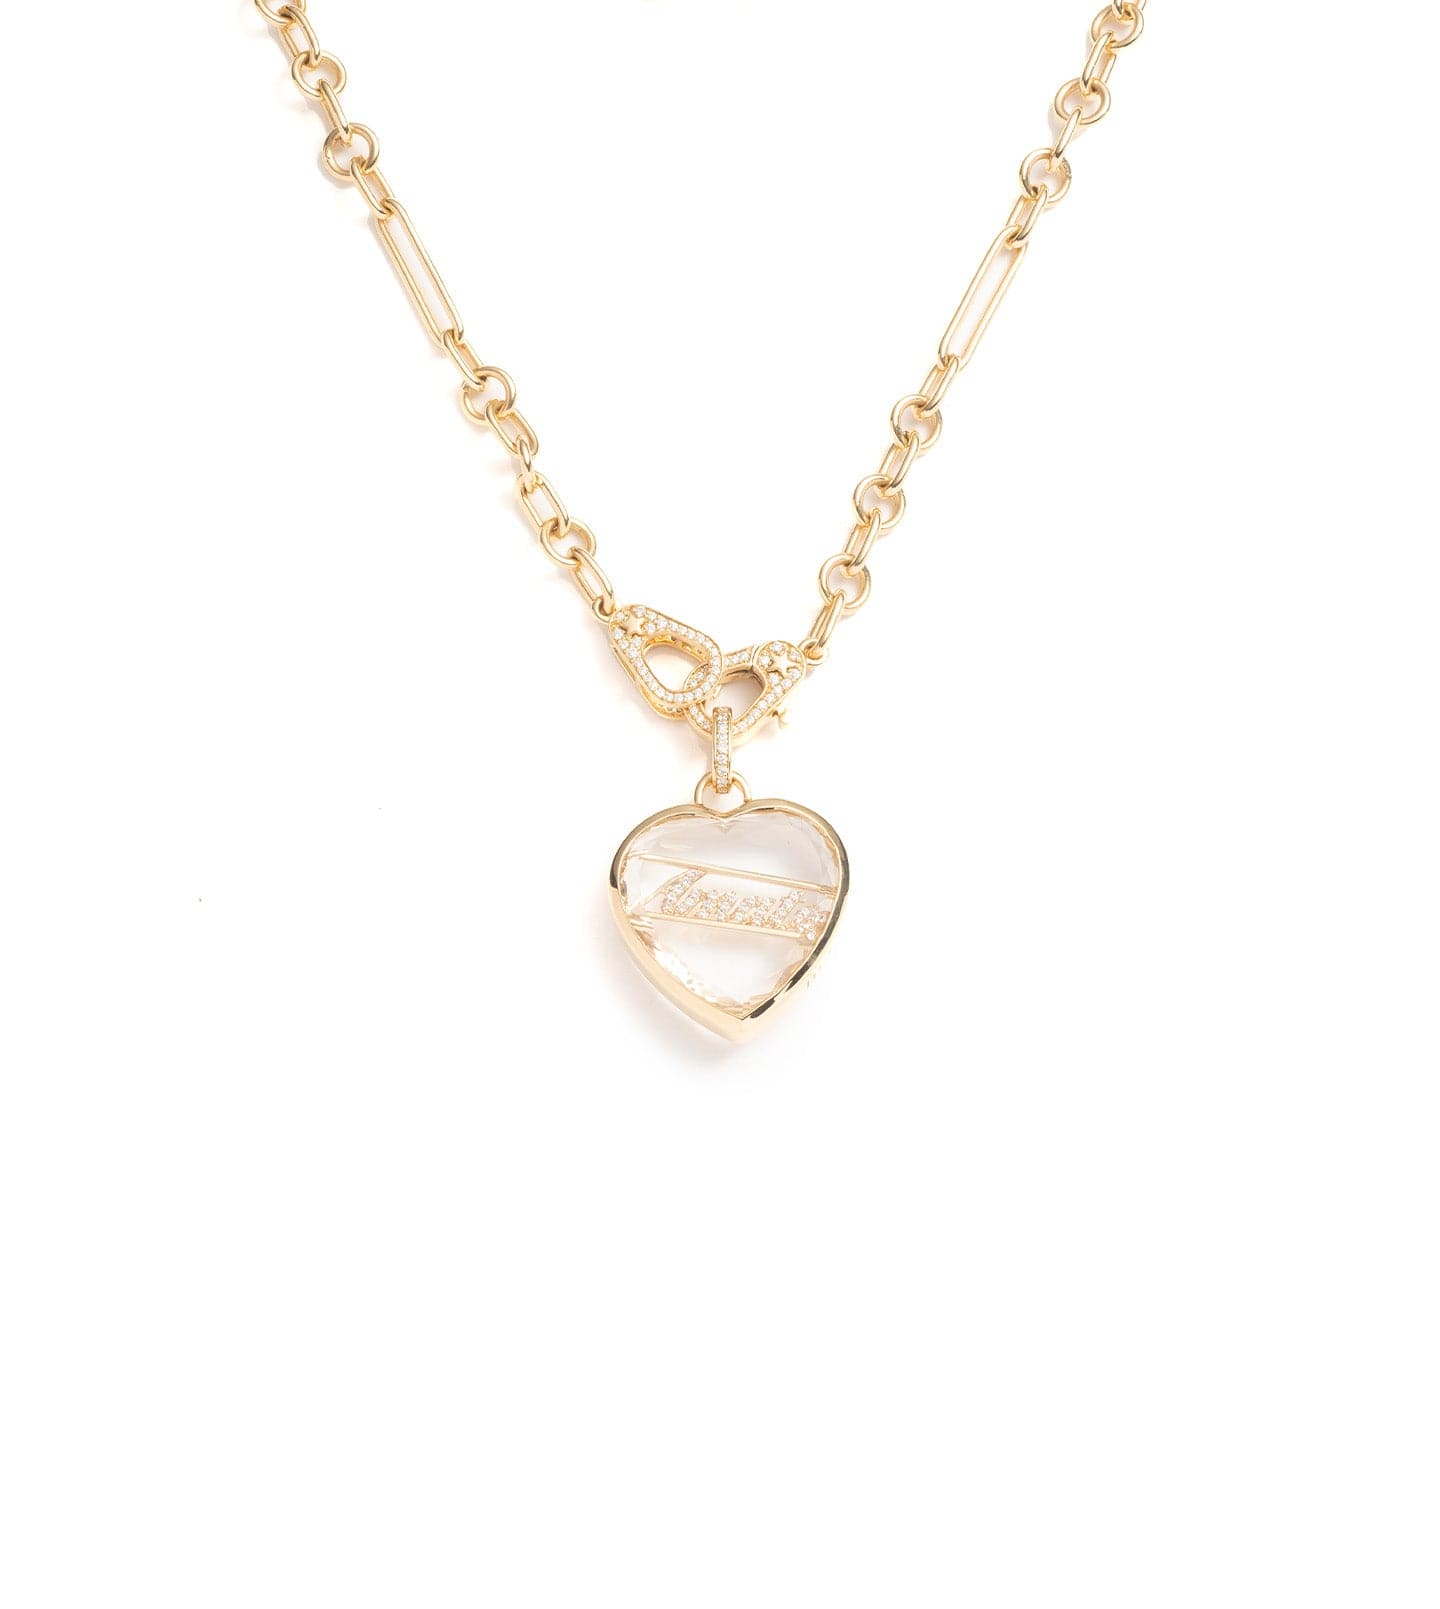 Amate - Love : Sealed Gemstone Small Mixed Clip Chain Necklace